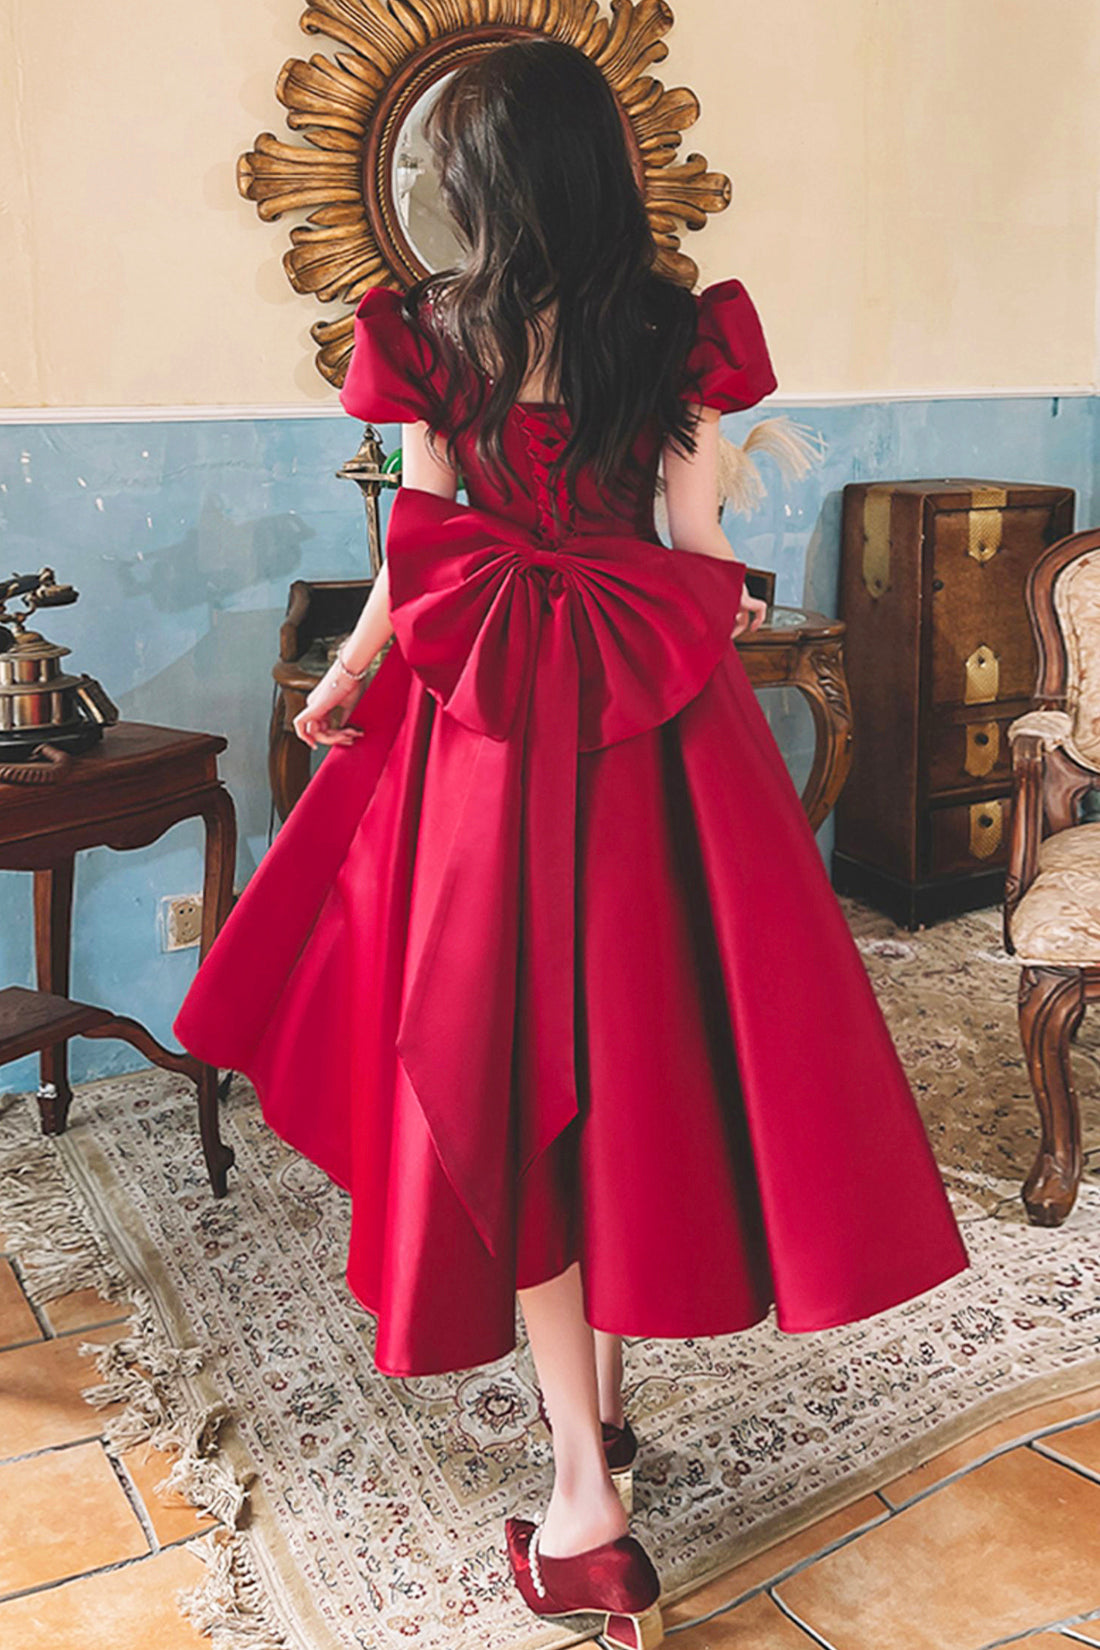 Burgundy Satin Short Prom Dress with Bow, Cute Short Sleeve Evening Party Dress